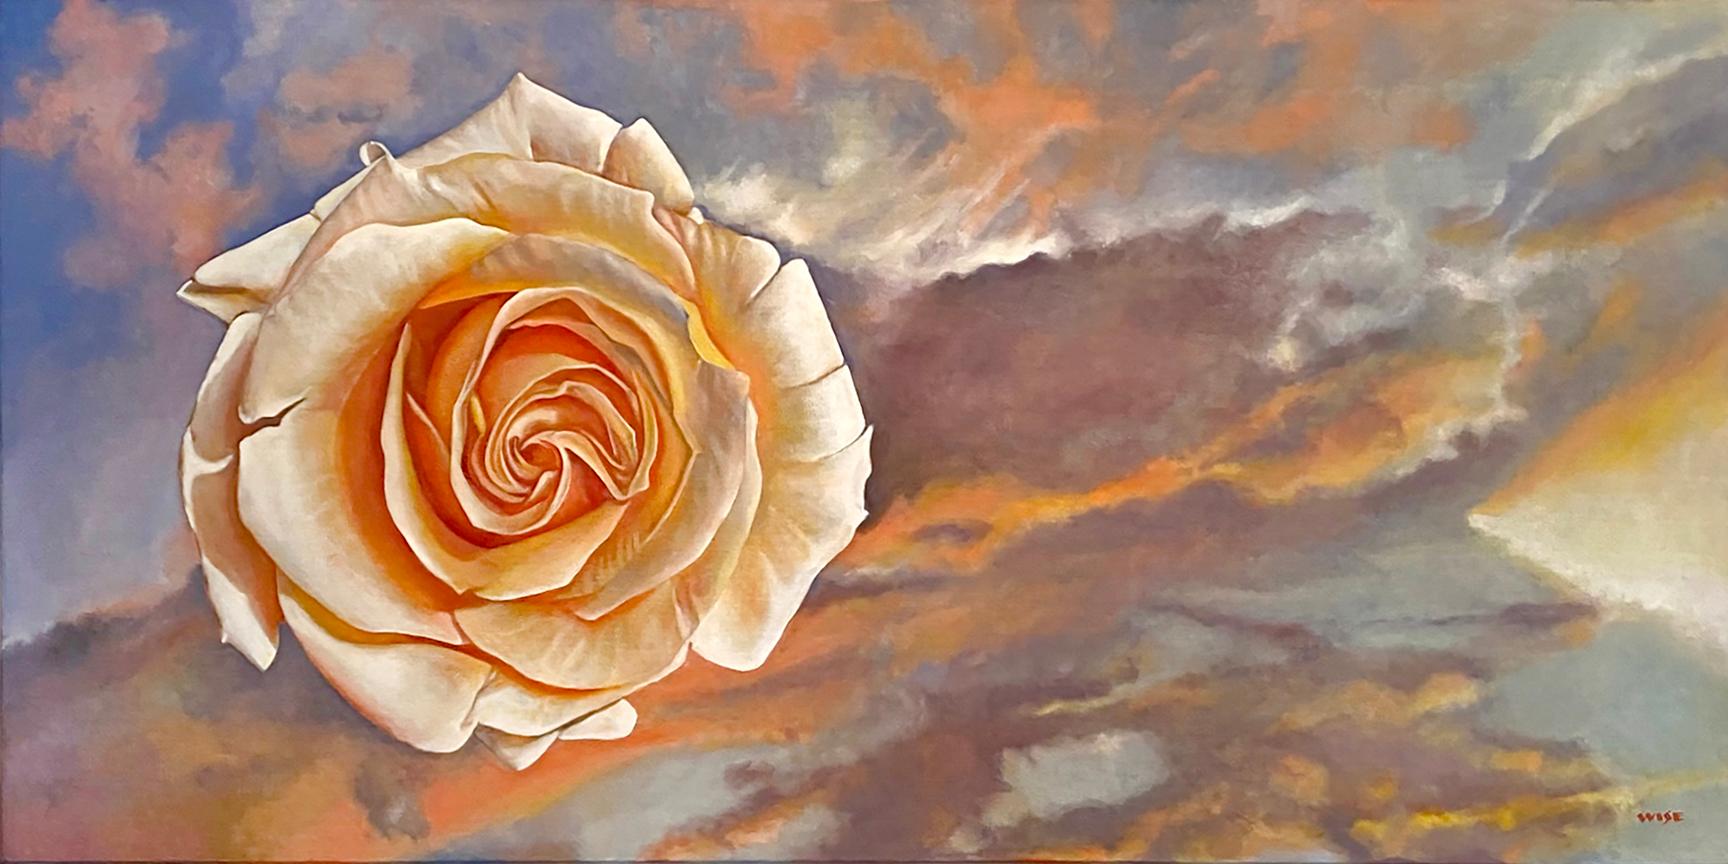 Jim Wise Still-Life Painting - "Pilgrimage" - floral painting, skyscape, realism - Georgia O'Keeffe